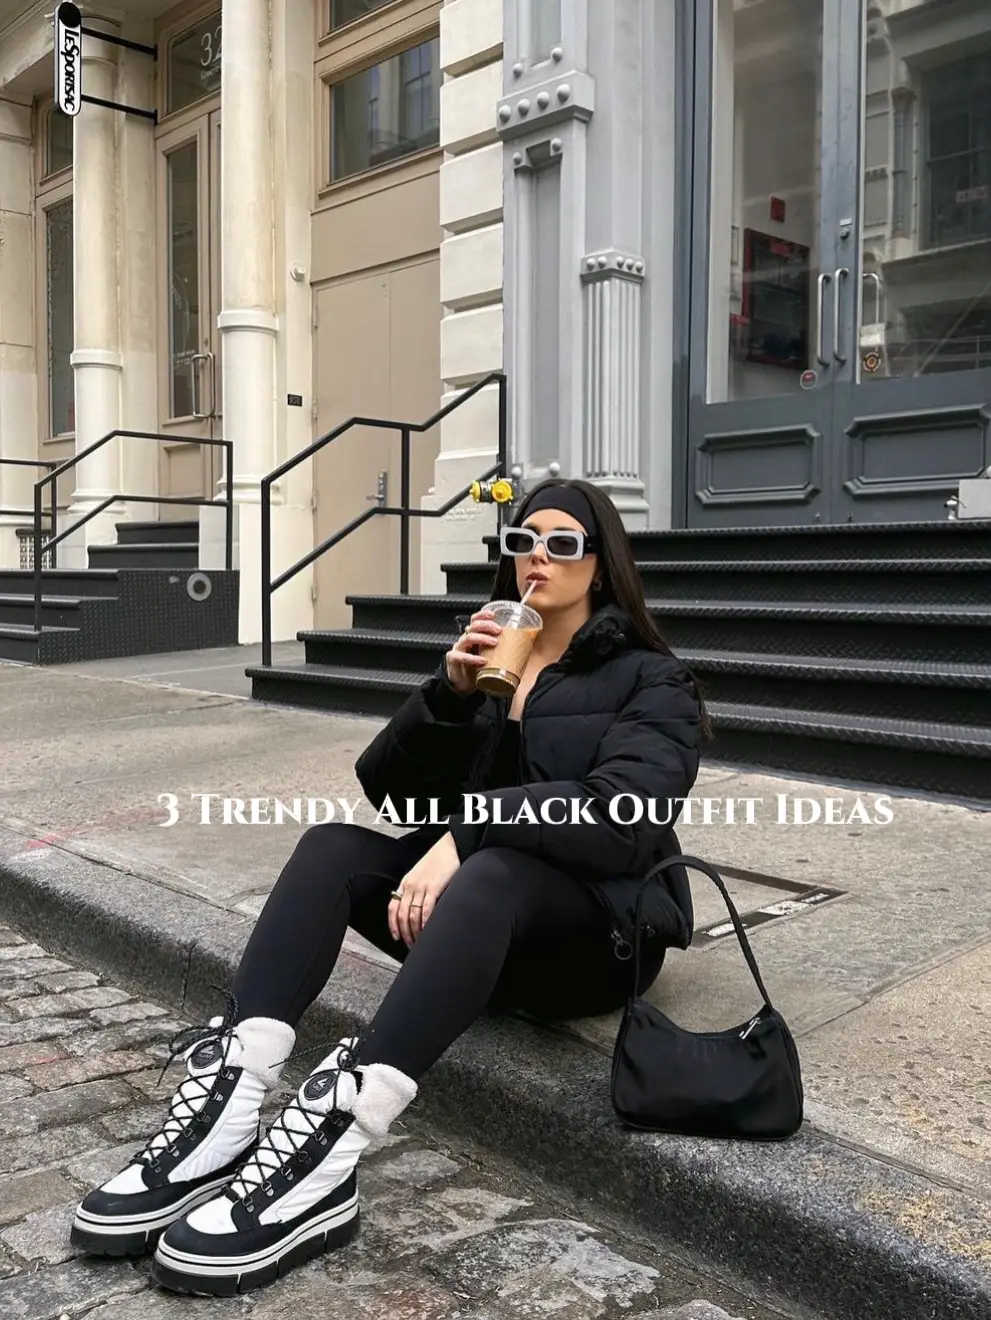 3 Trendy All Black Outfit Ideas, Gallery posted by Vanessa